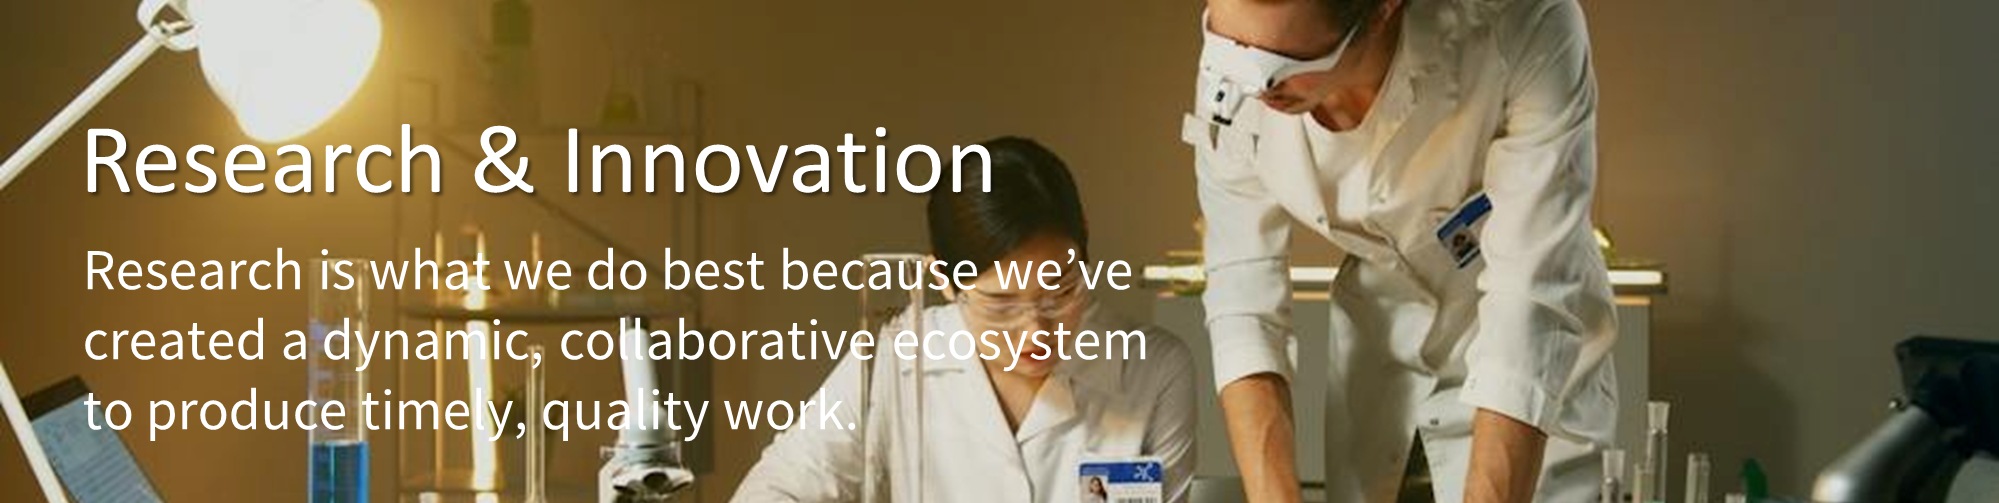 Research and Innovation Banner